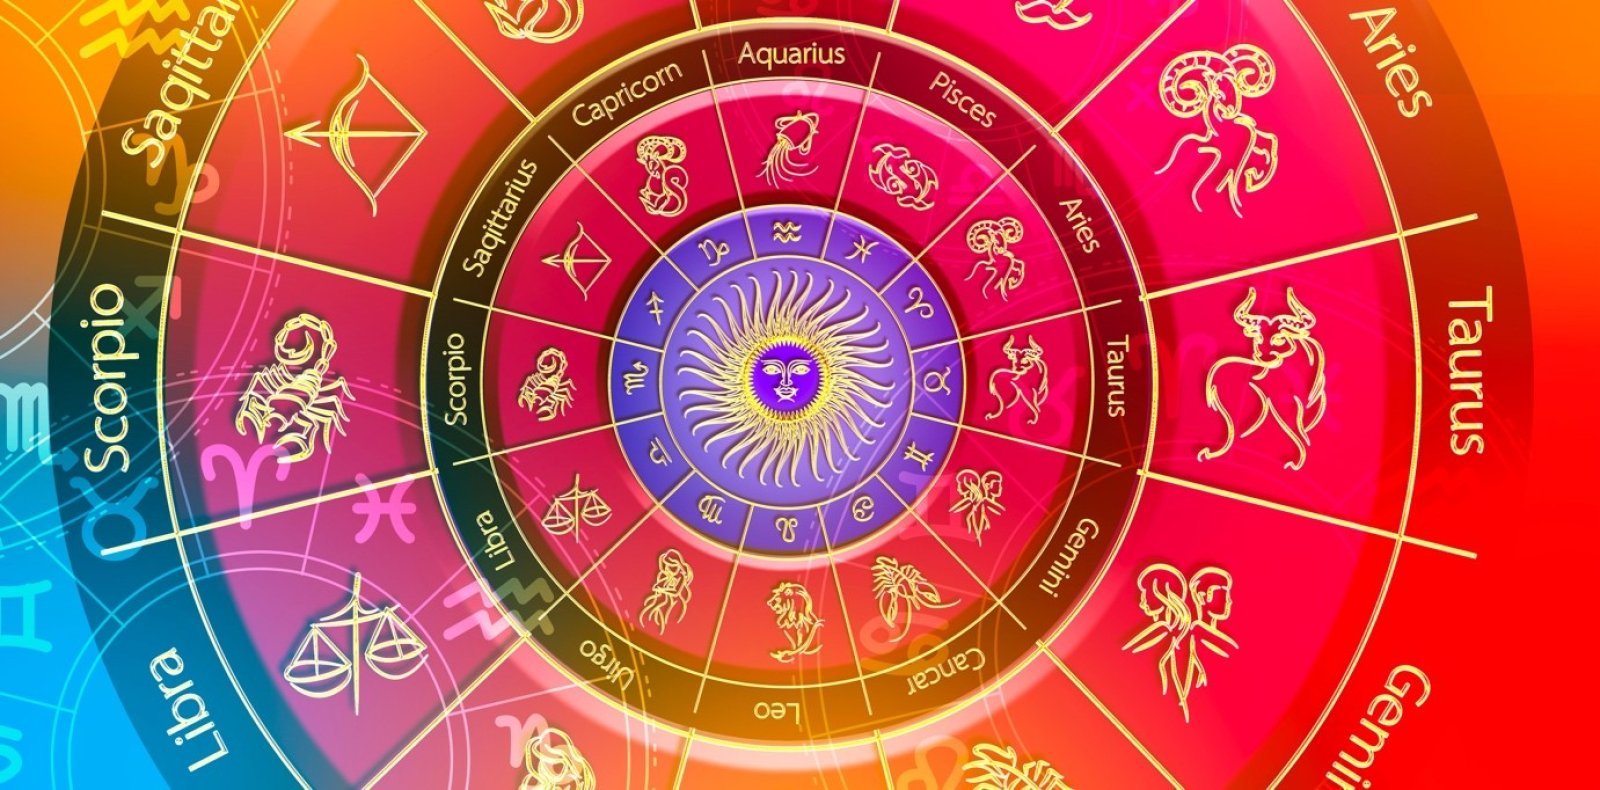 Astrology 2.0: TellerZone's Ambitious Voyage into the Future of Celestial Wisdom